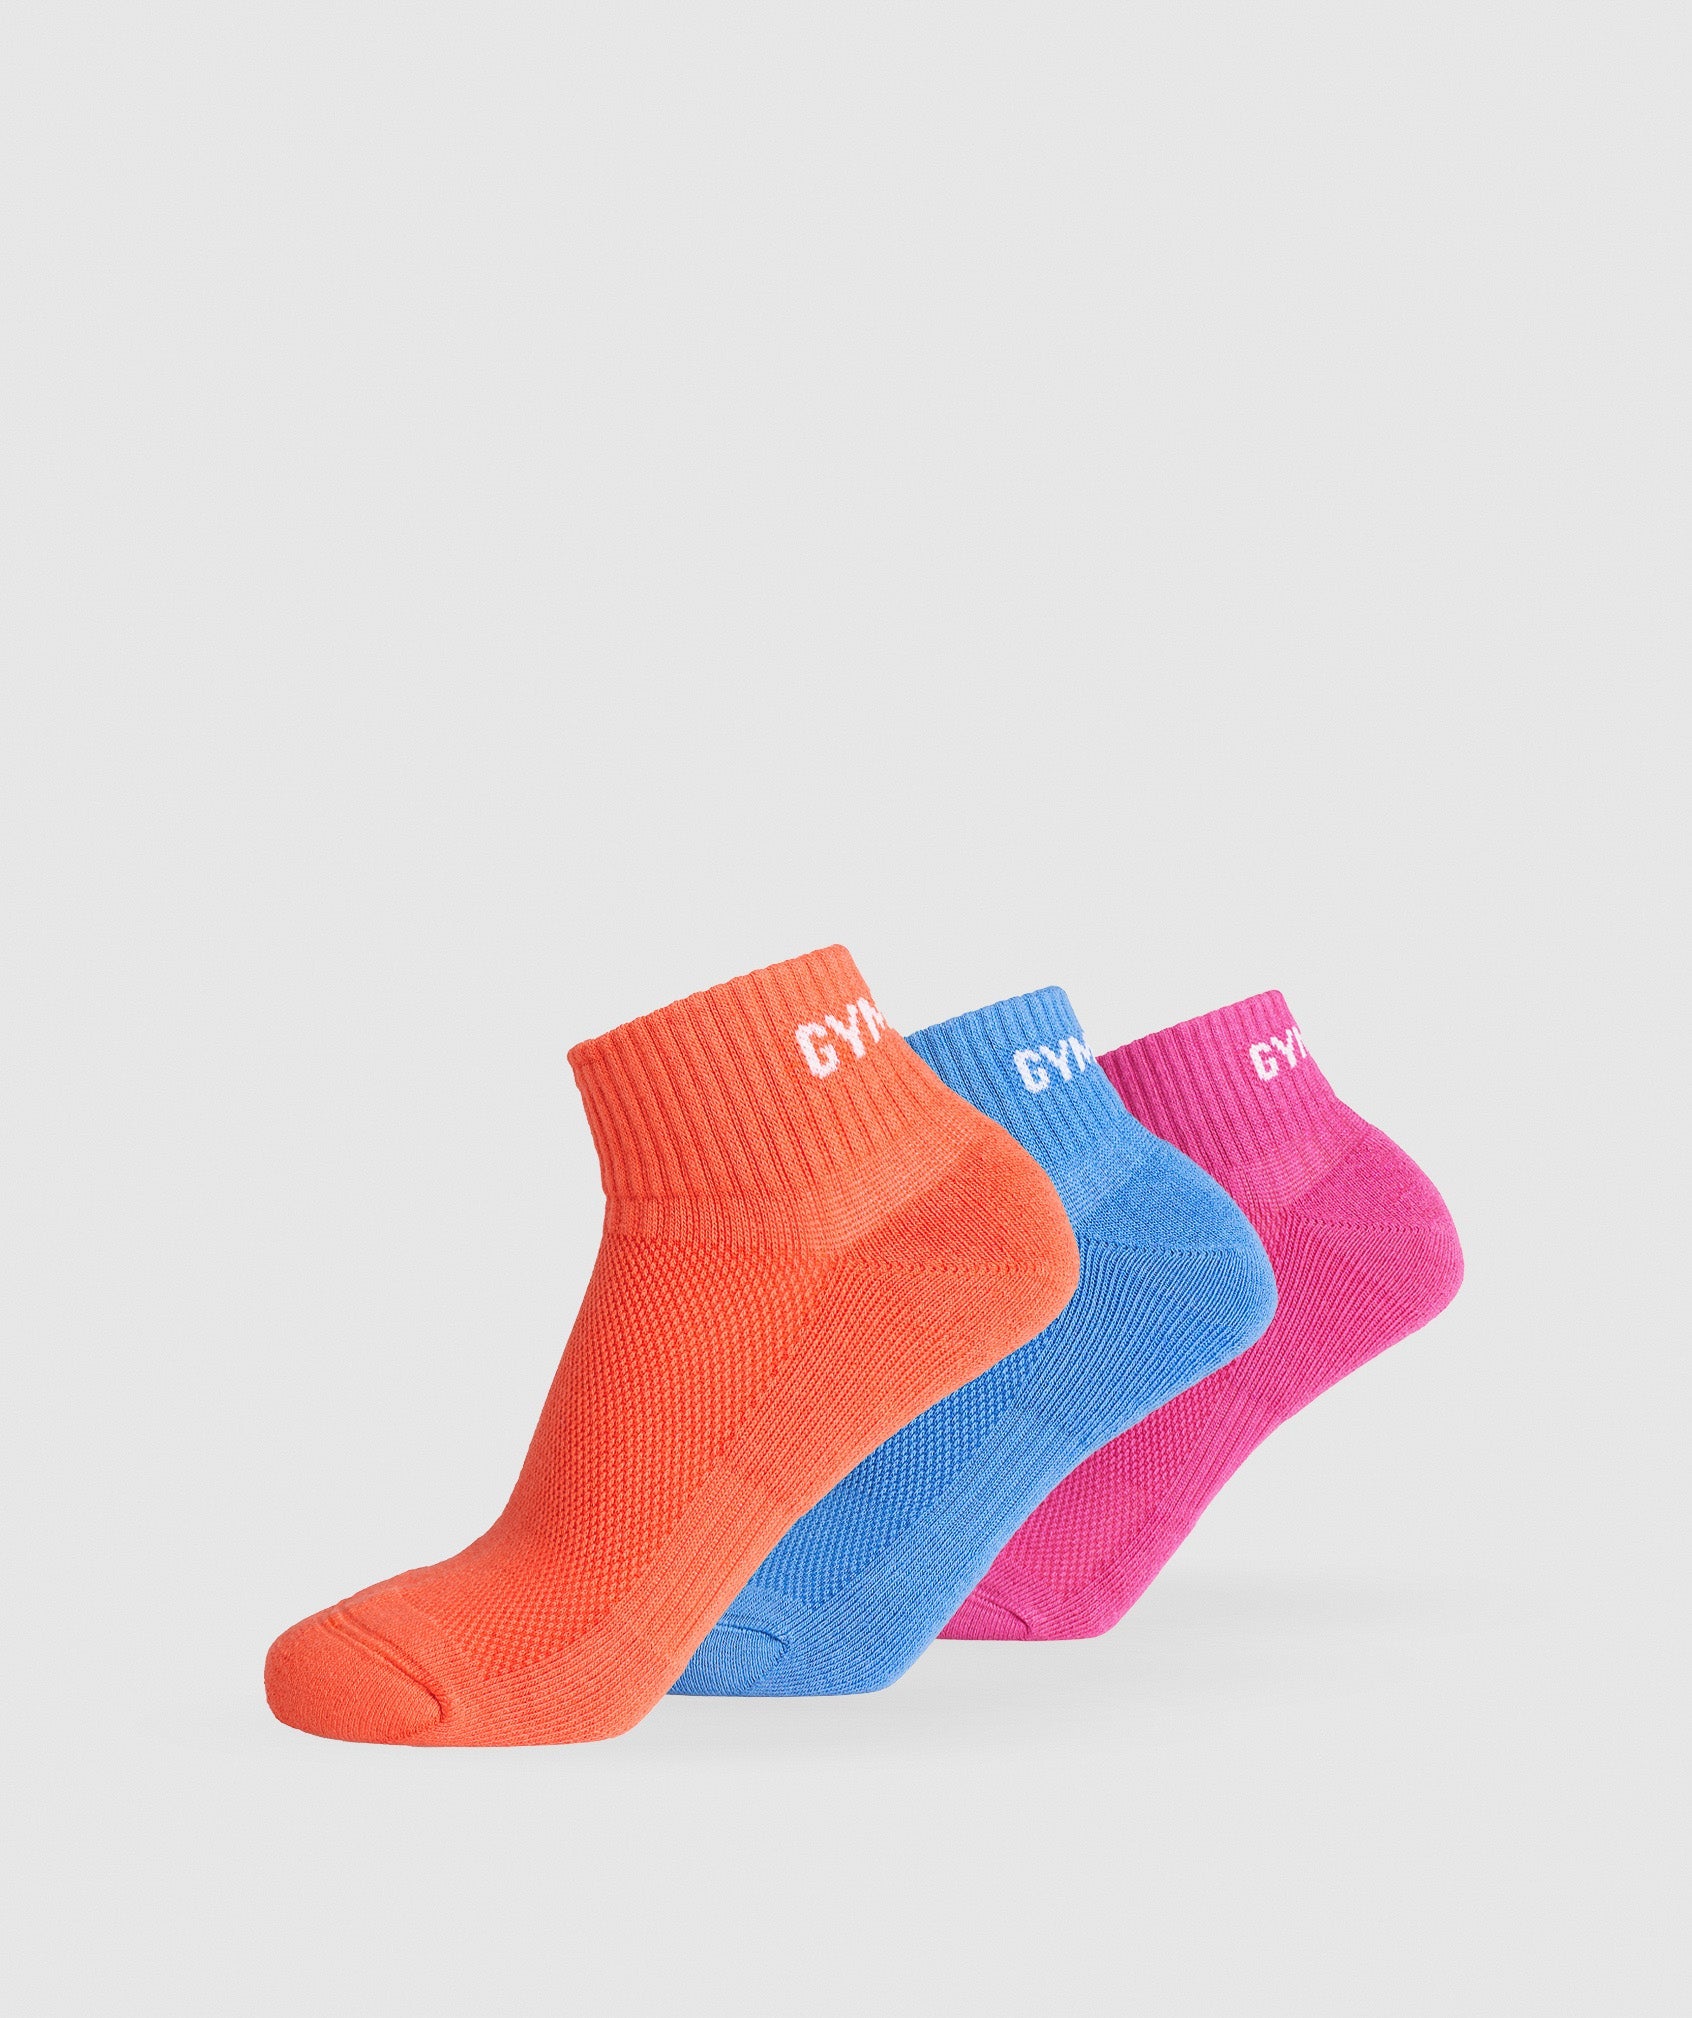 Jacquared Quarter Socks 3pk in {{variantColor} is out of stock